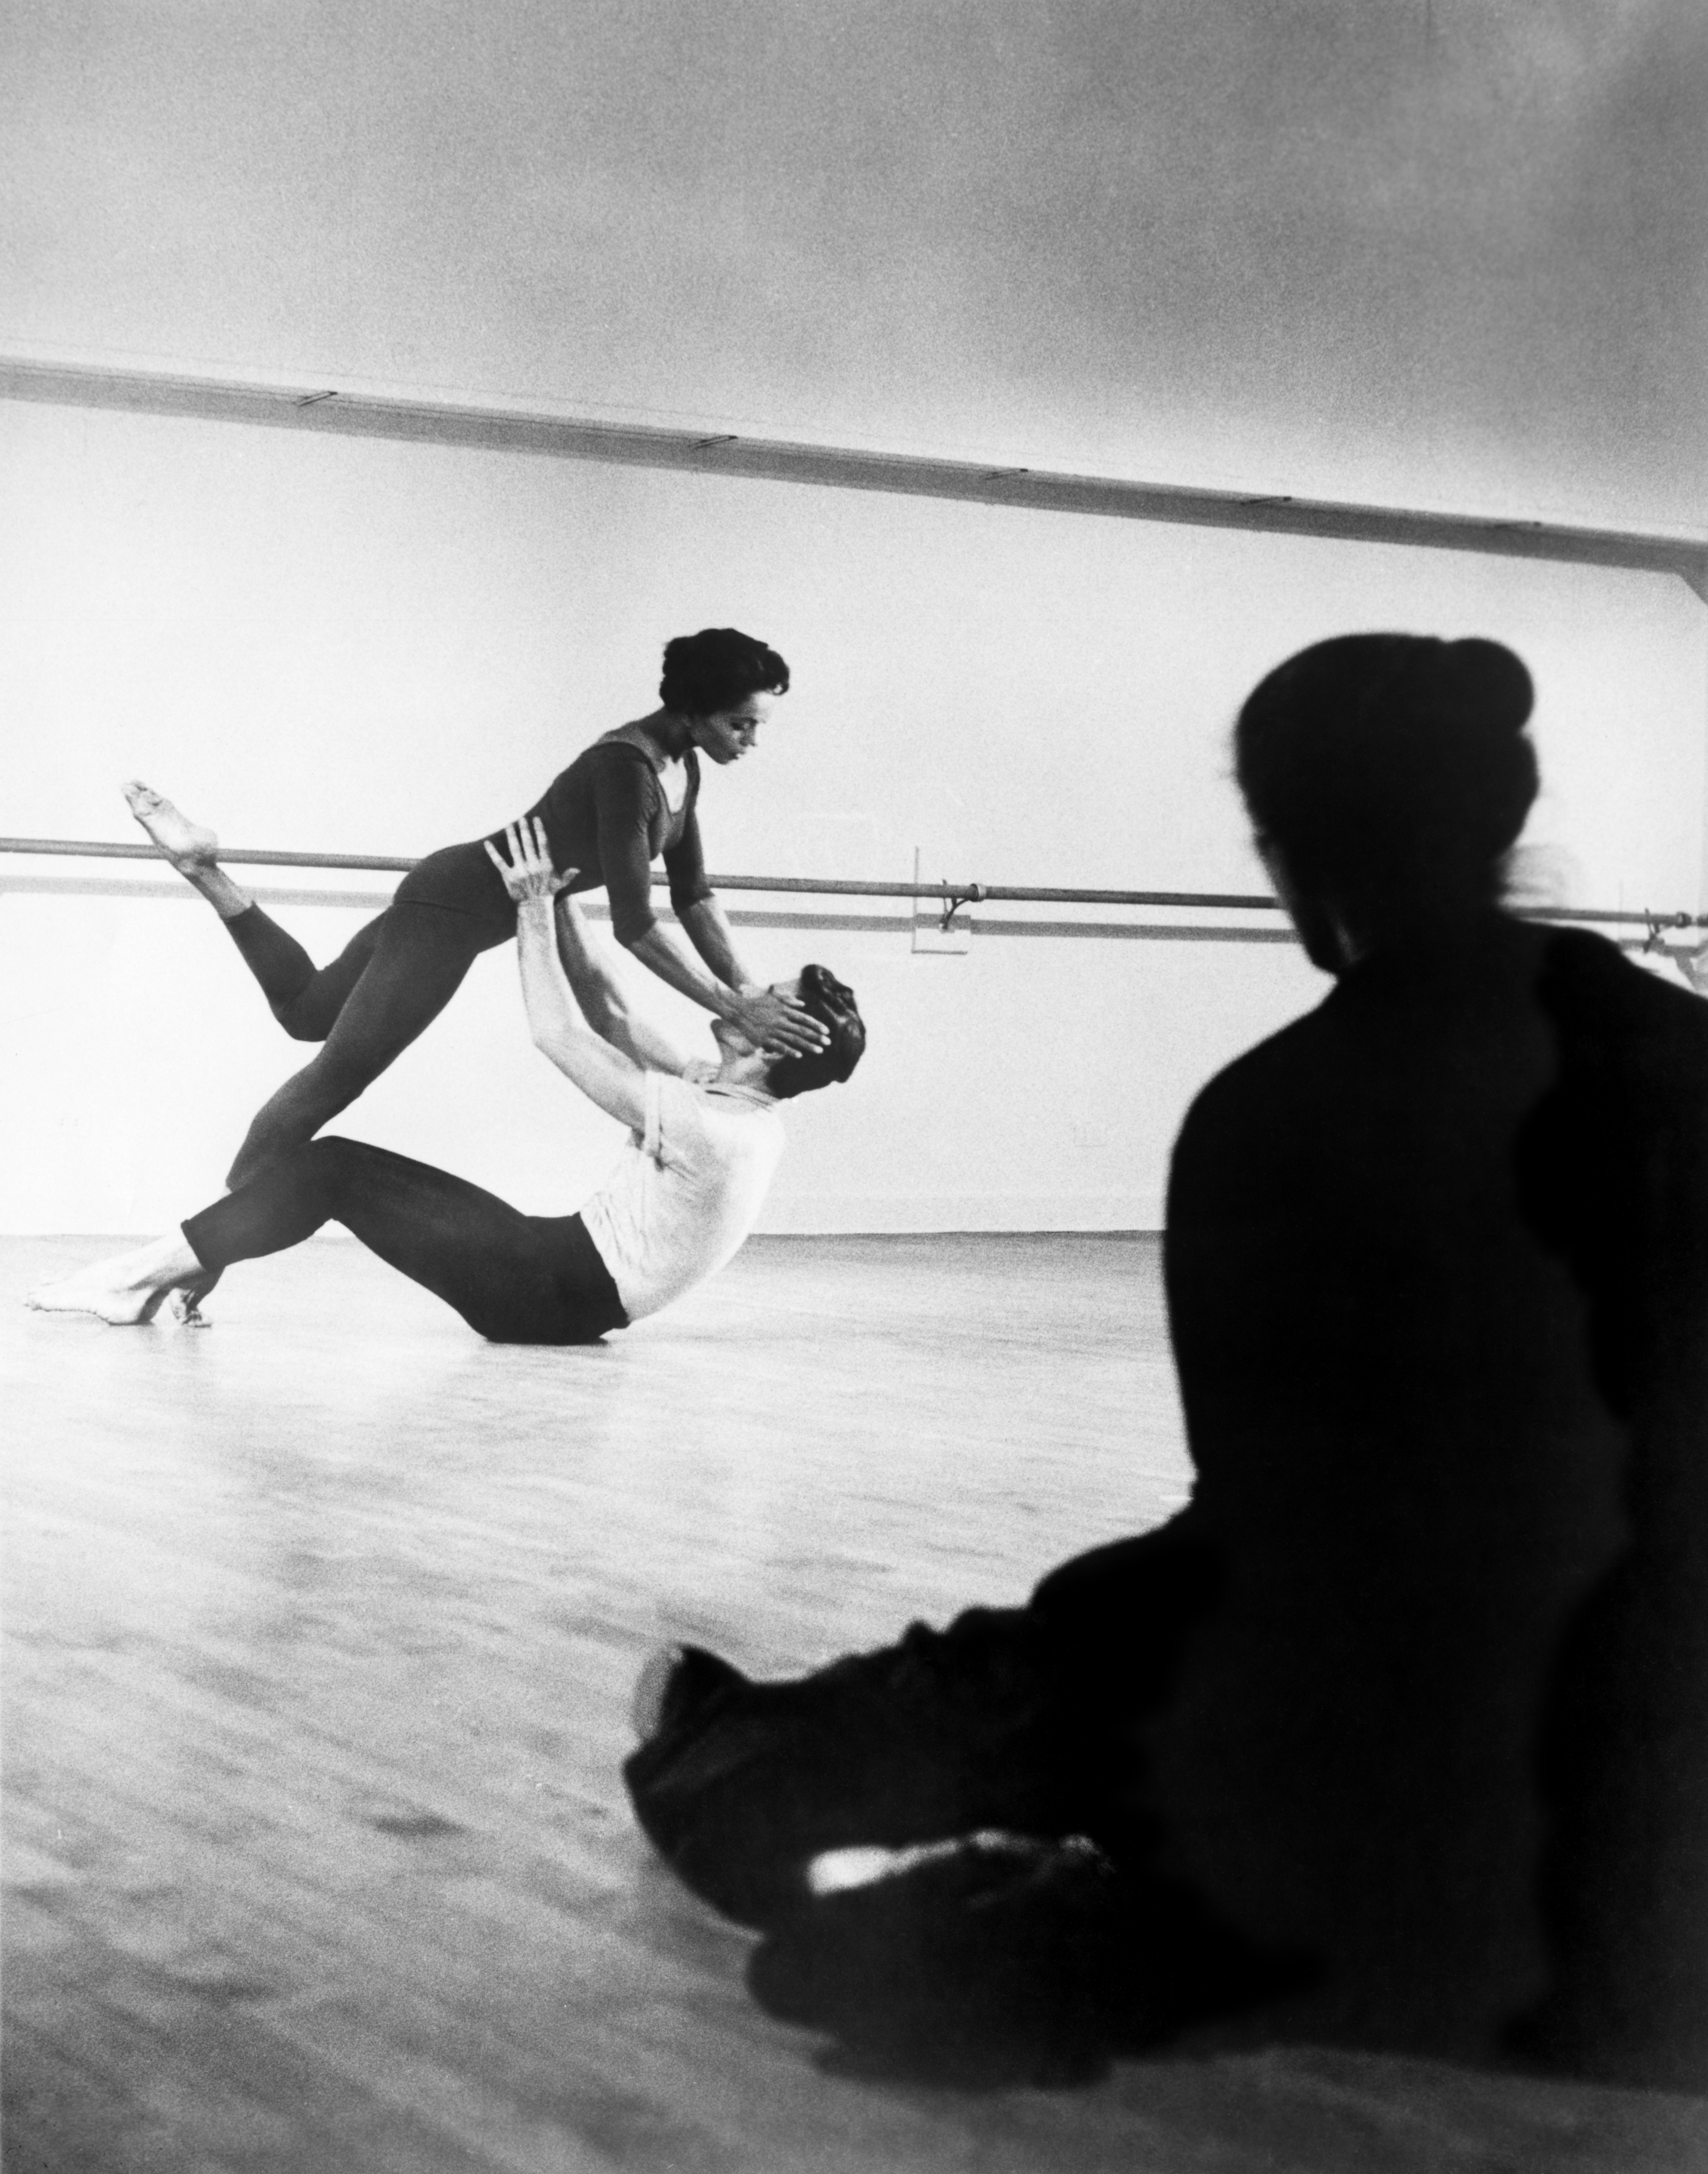 Dancers in studio in an historic (black and white) photograph